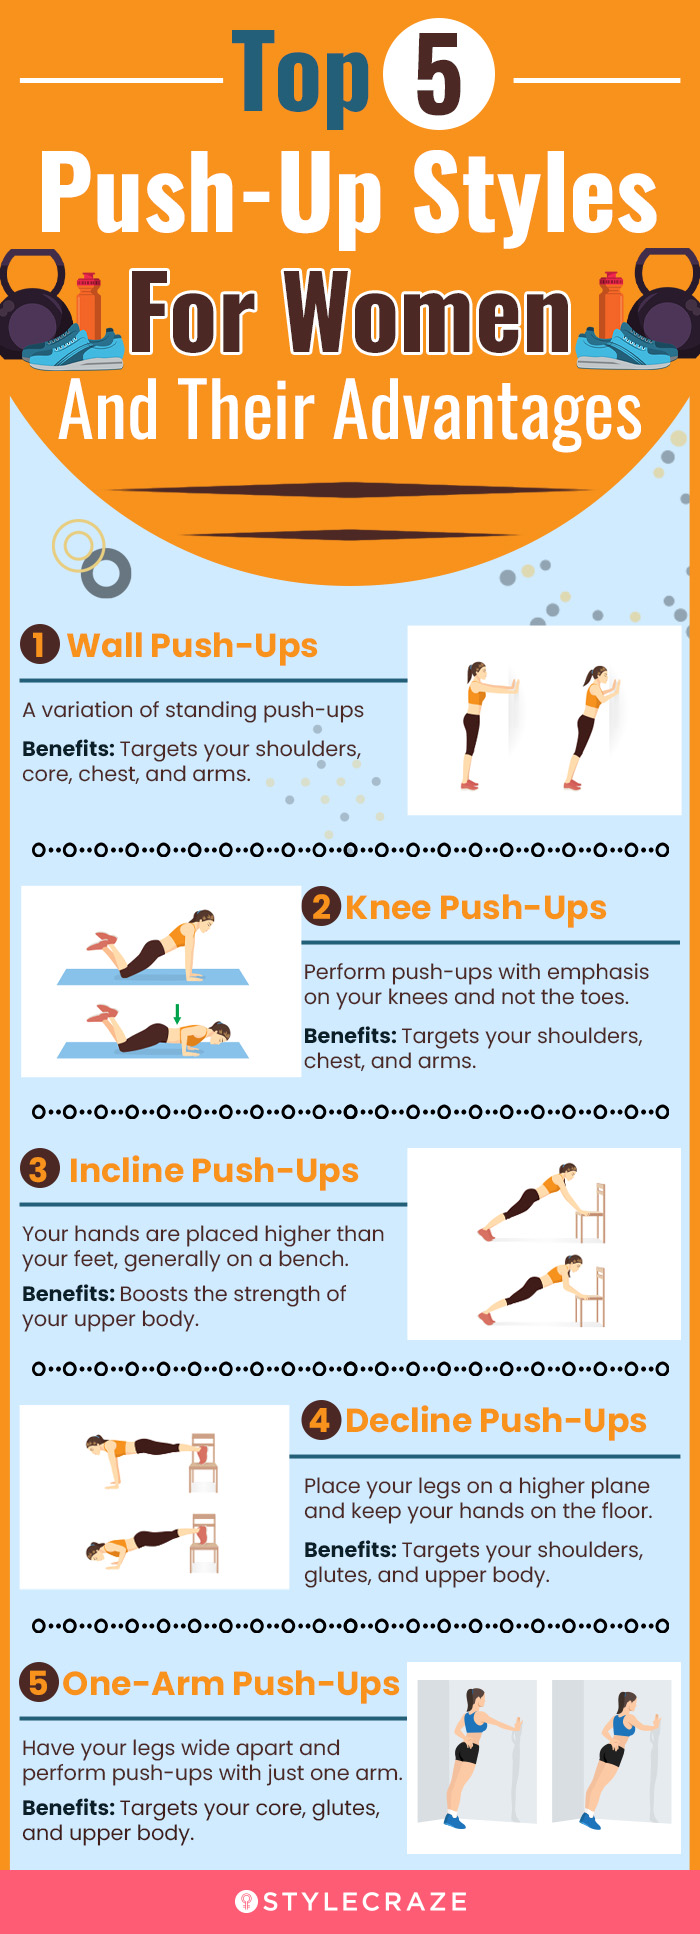 top 5 push up styles for women and their advantages [infographic]